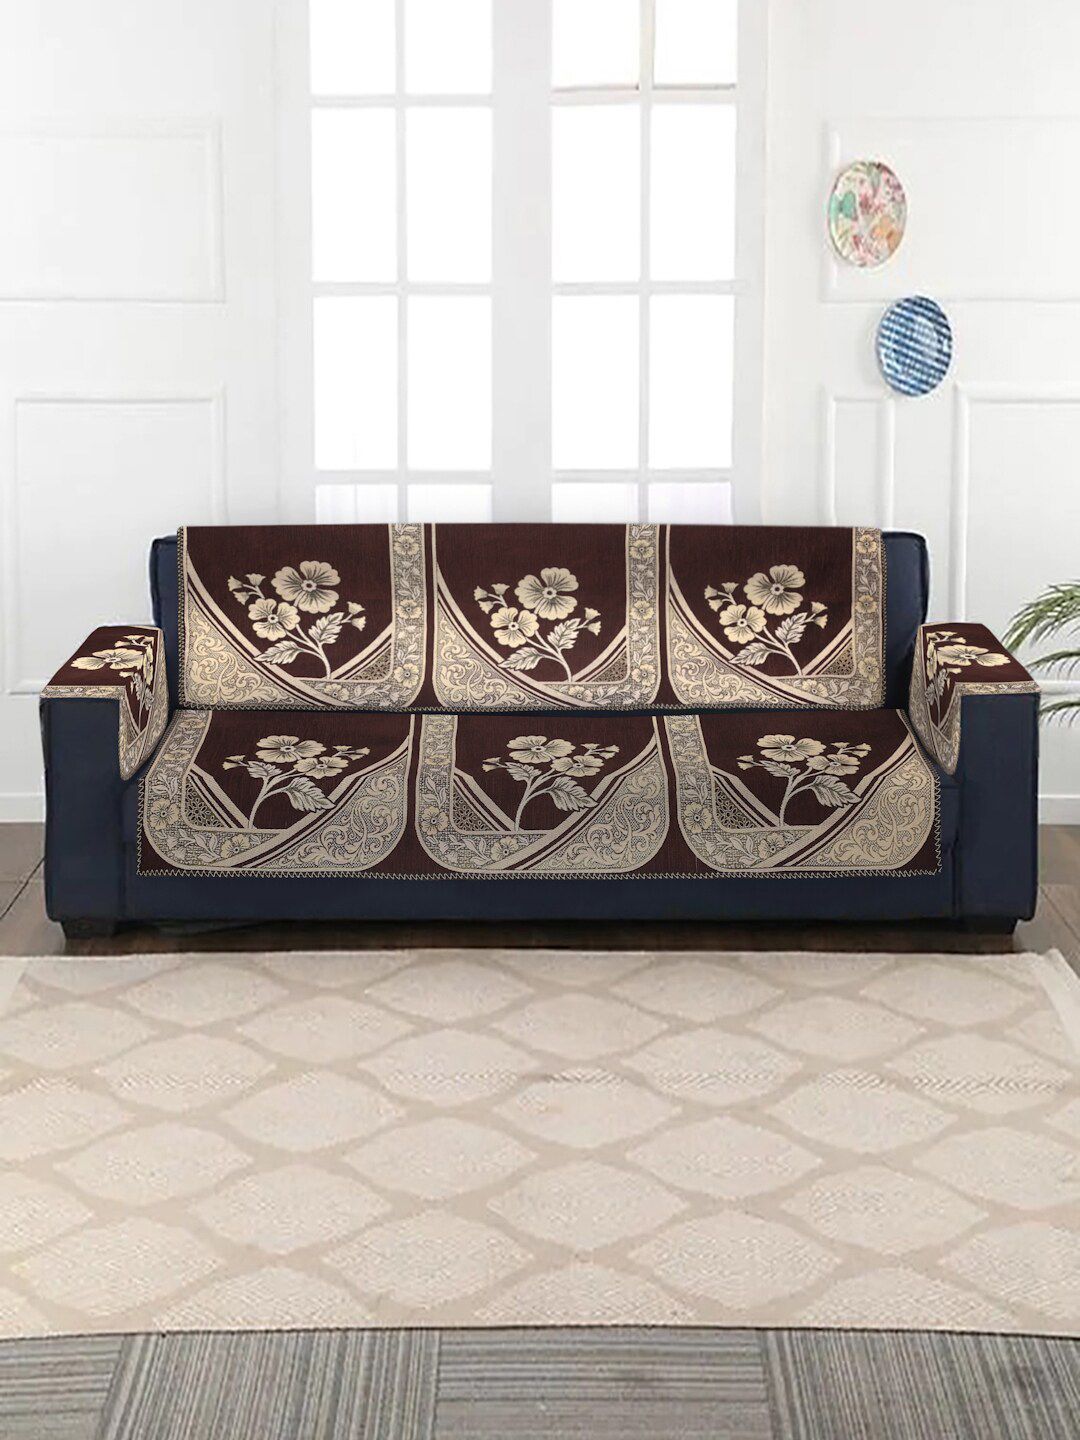 MULTITEX Set of 16 Brown Jacquard 5 Seater Sofa Covers with Arm Covers Price in India